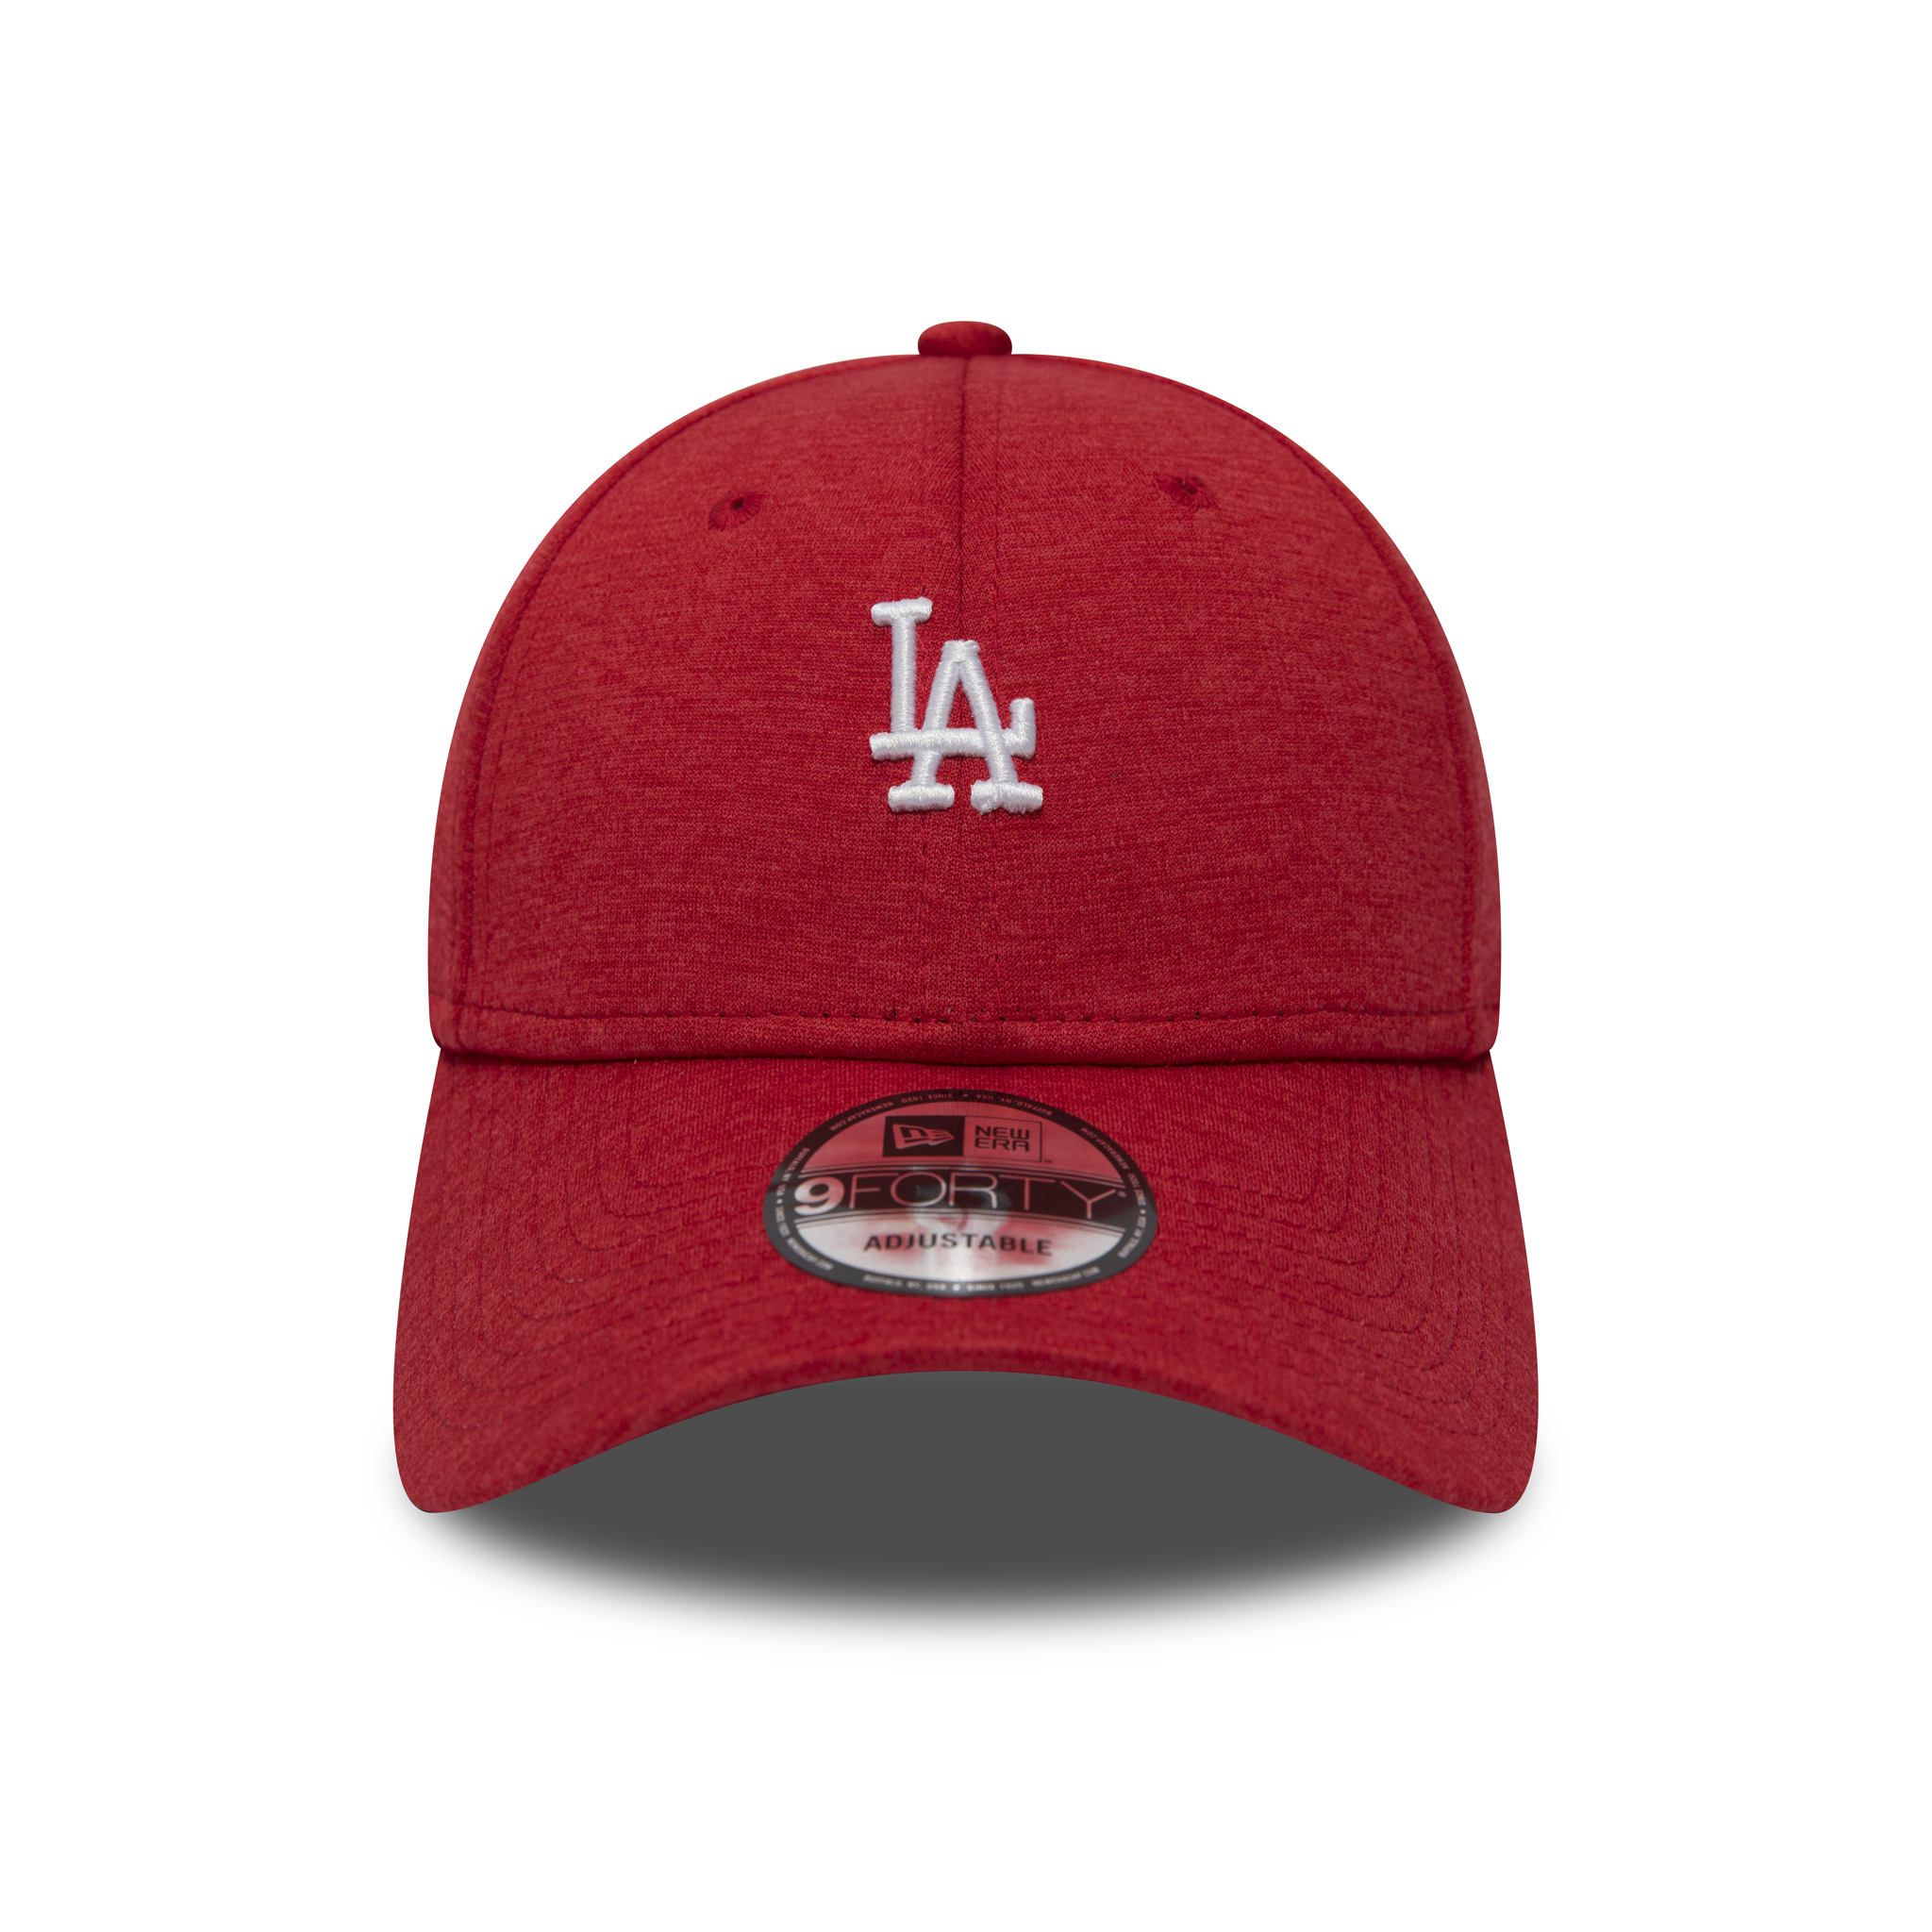 Los Angeles Dodgers 9FORTY-Kappe in Scharlachrot